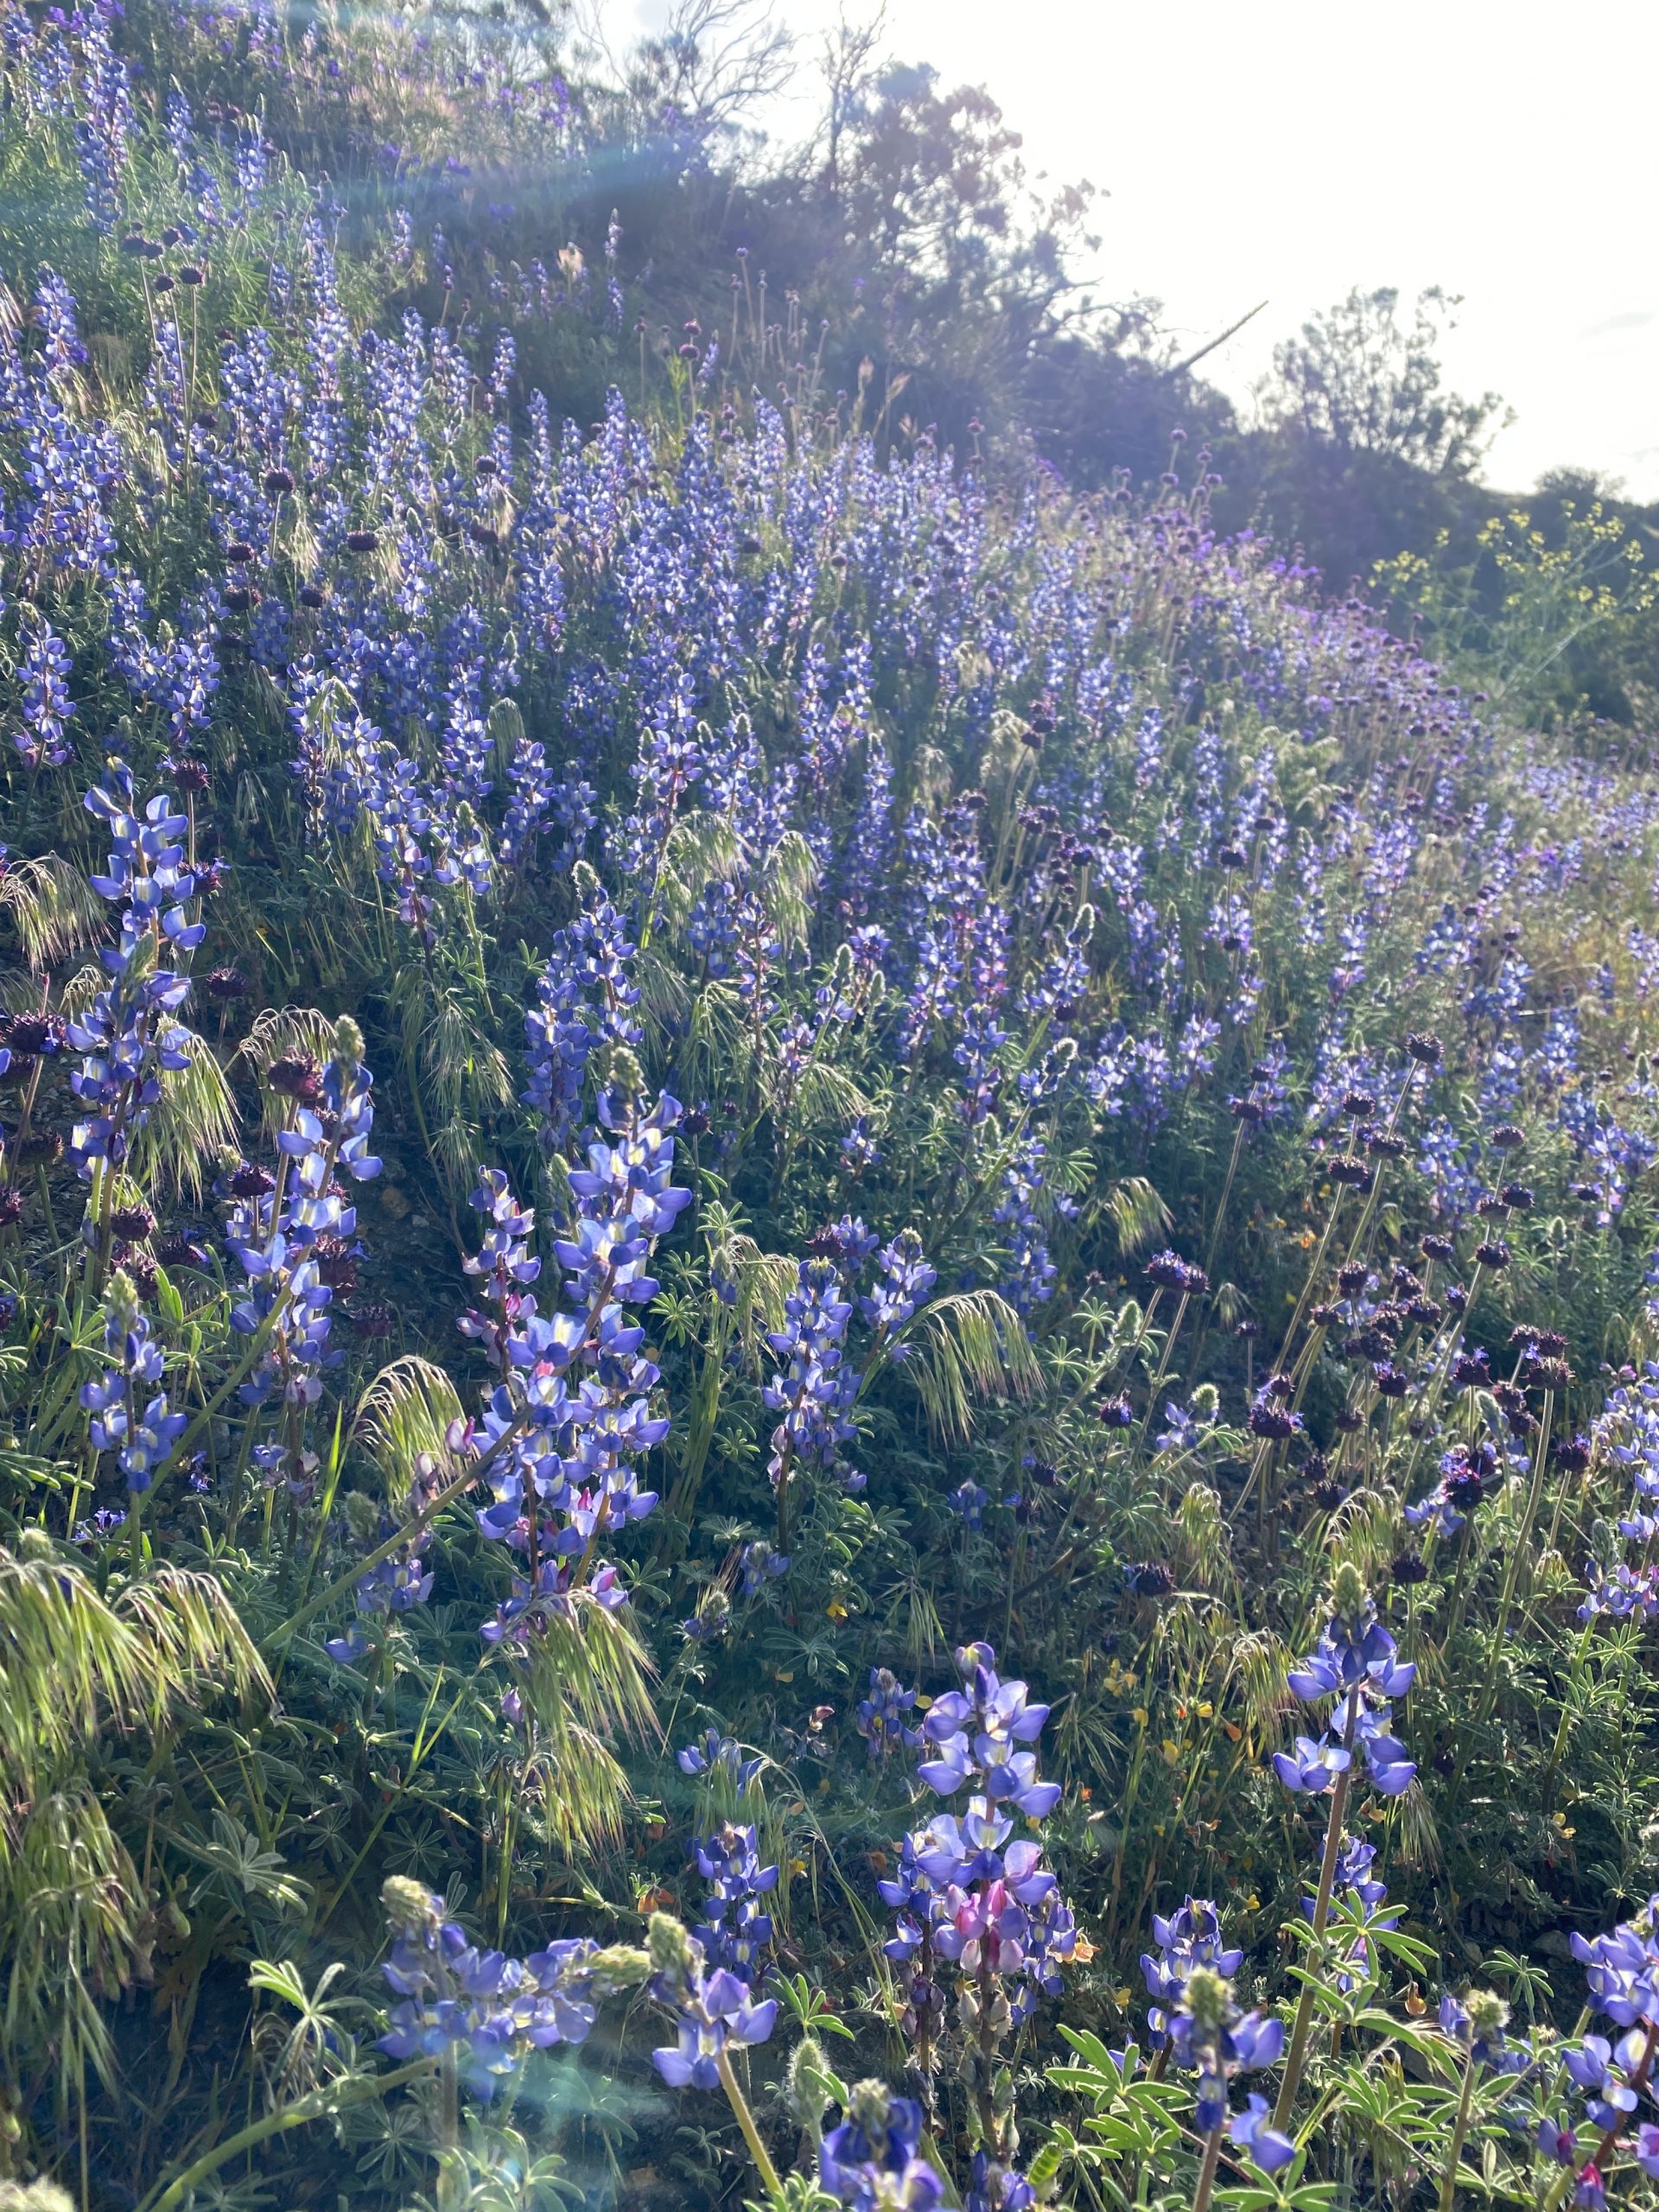 lupines Mile 146.1 to Paradise Valley Cafe (Mile 151.8)